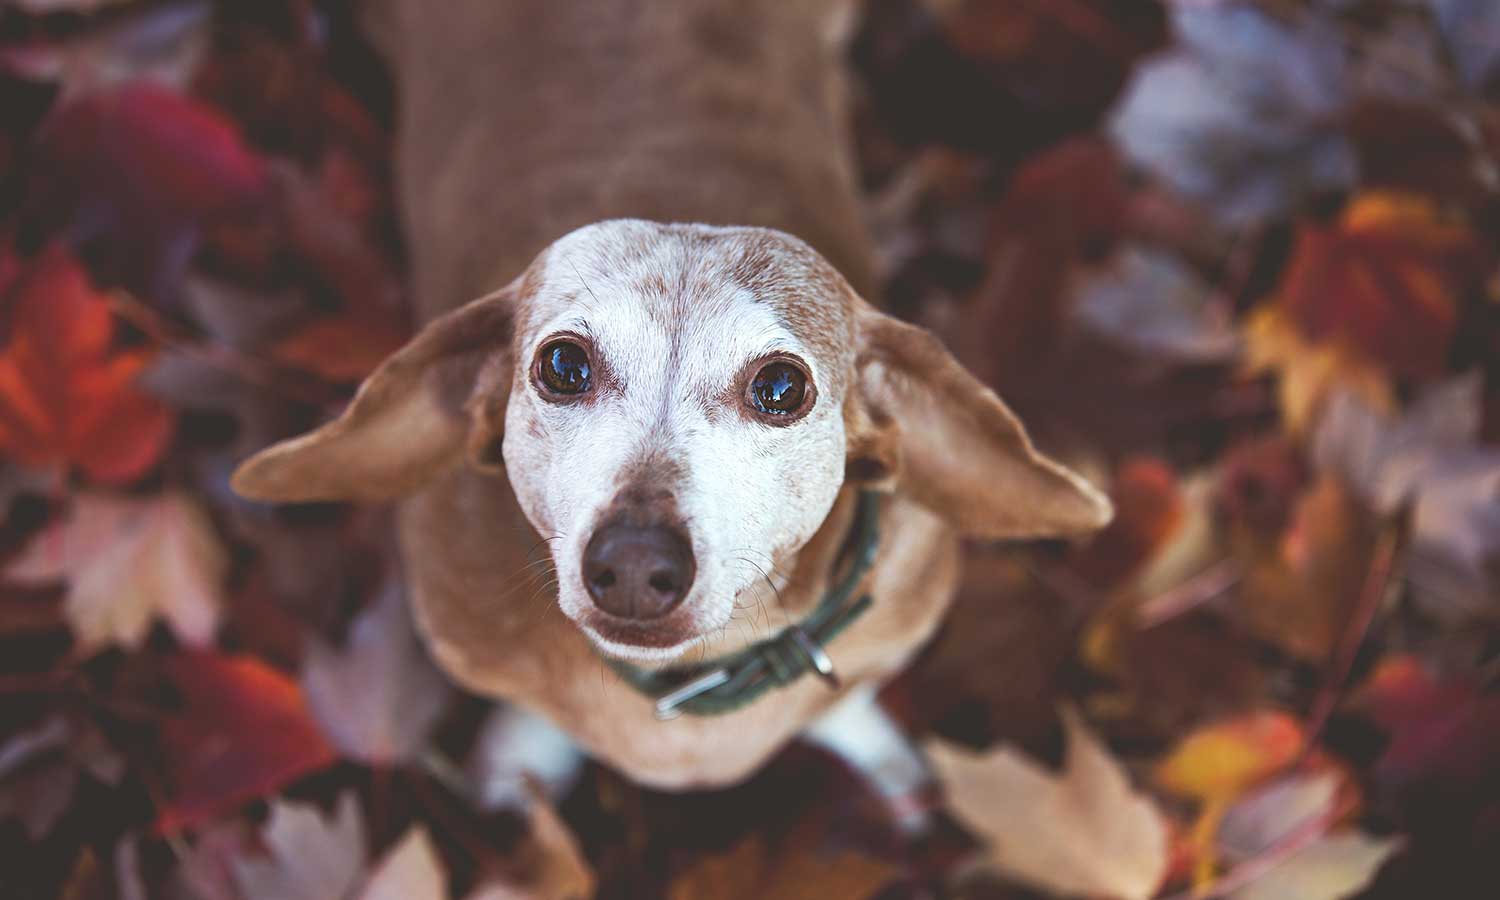 An aging dog in the leaves